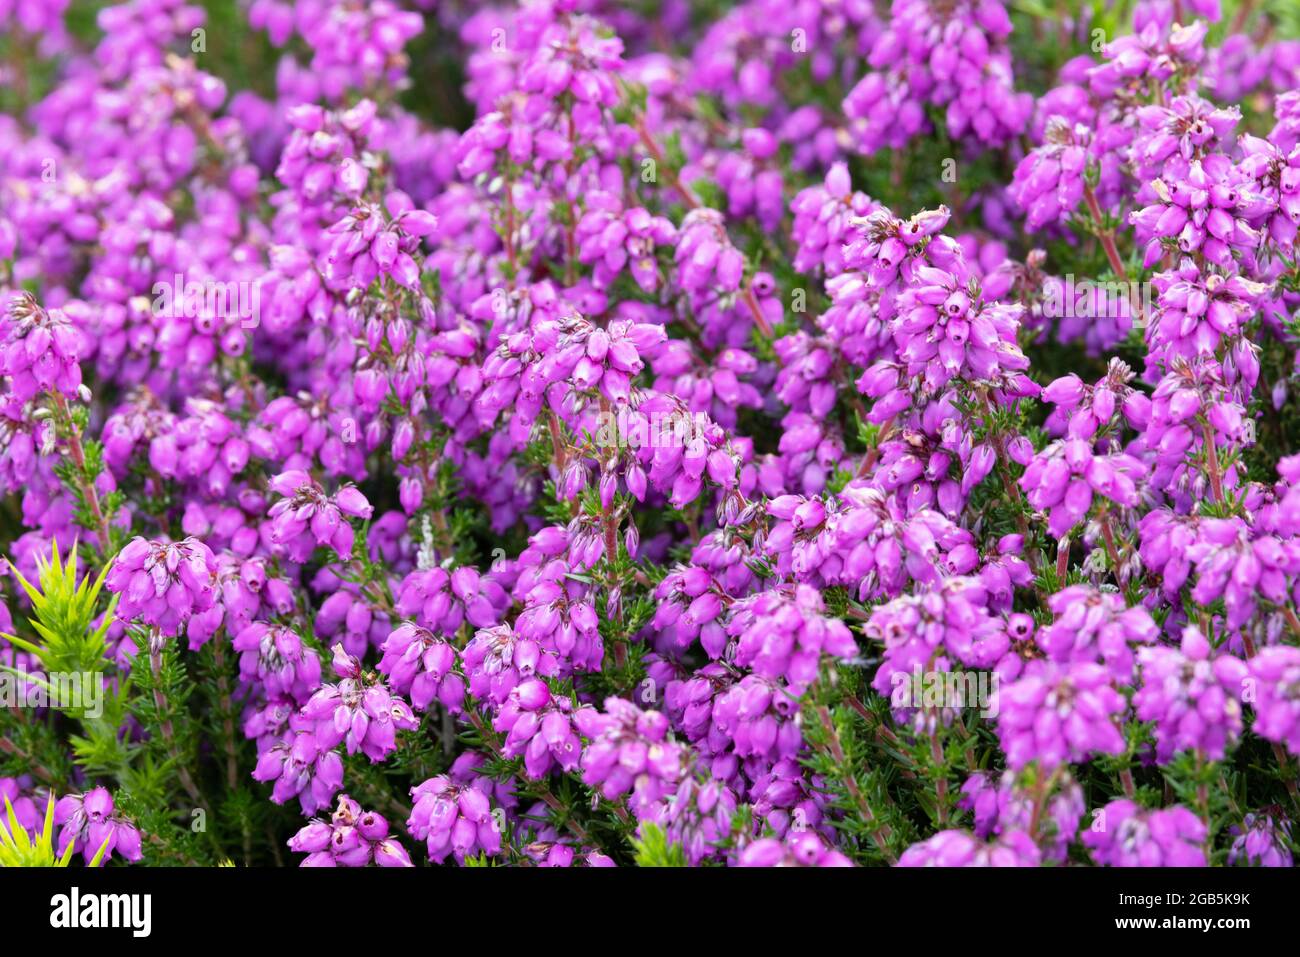 Bell Heather flowers (Erica cinerea), flowering in summer, Example of British wildflowers, purple flowers containing much nectar, UK Stock Photo